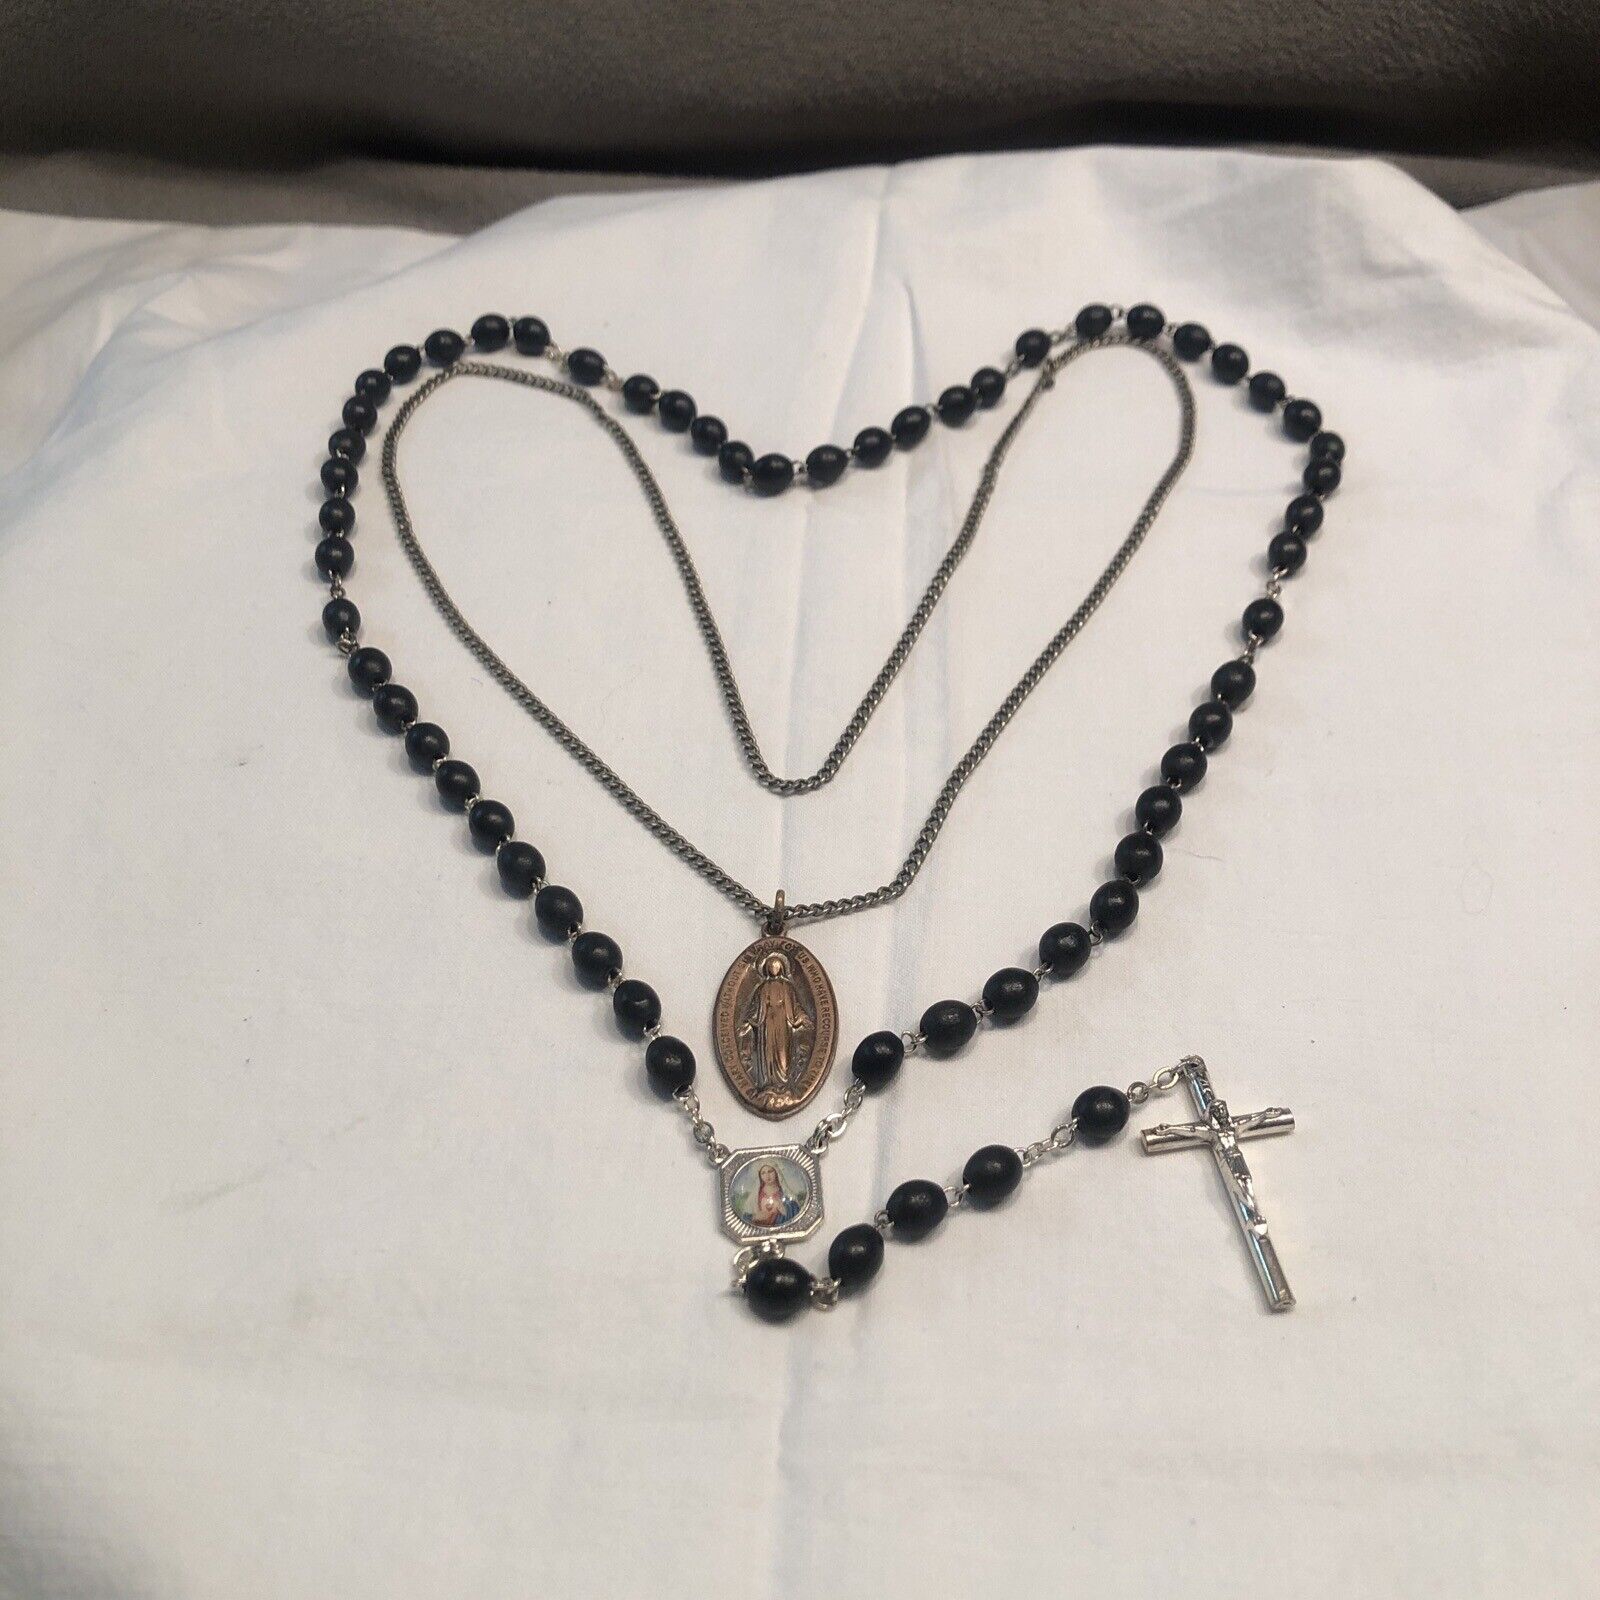 Vntg Lot Of 2 CHAPEL STERLING SILVER Black Rosary Crucifix Beads & Neckless